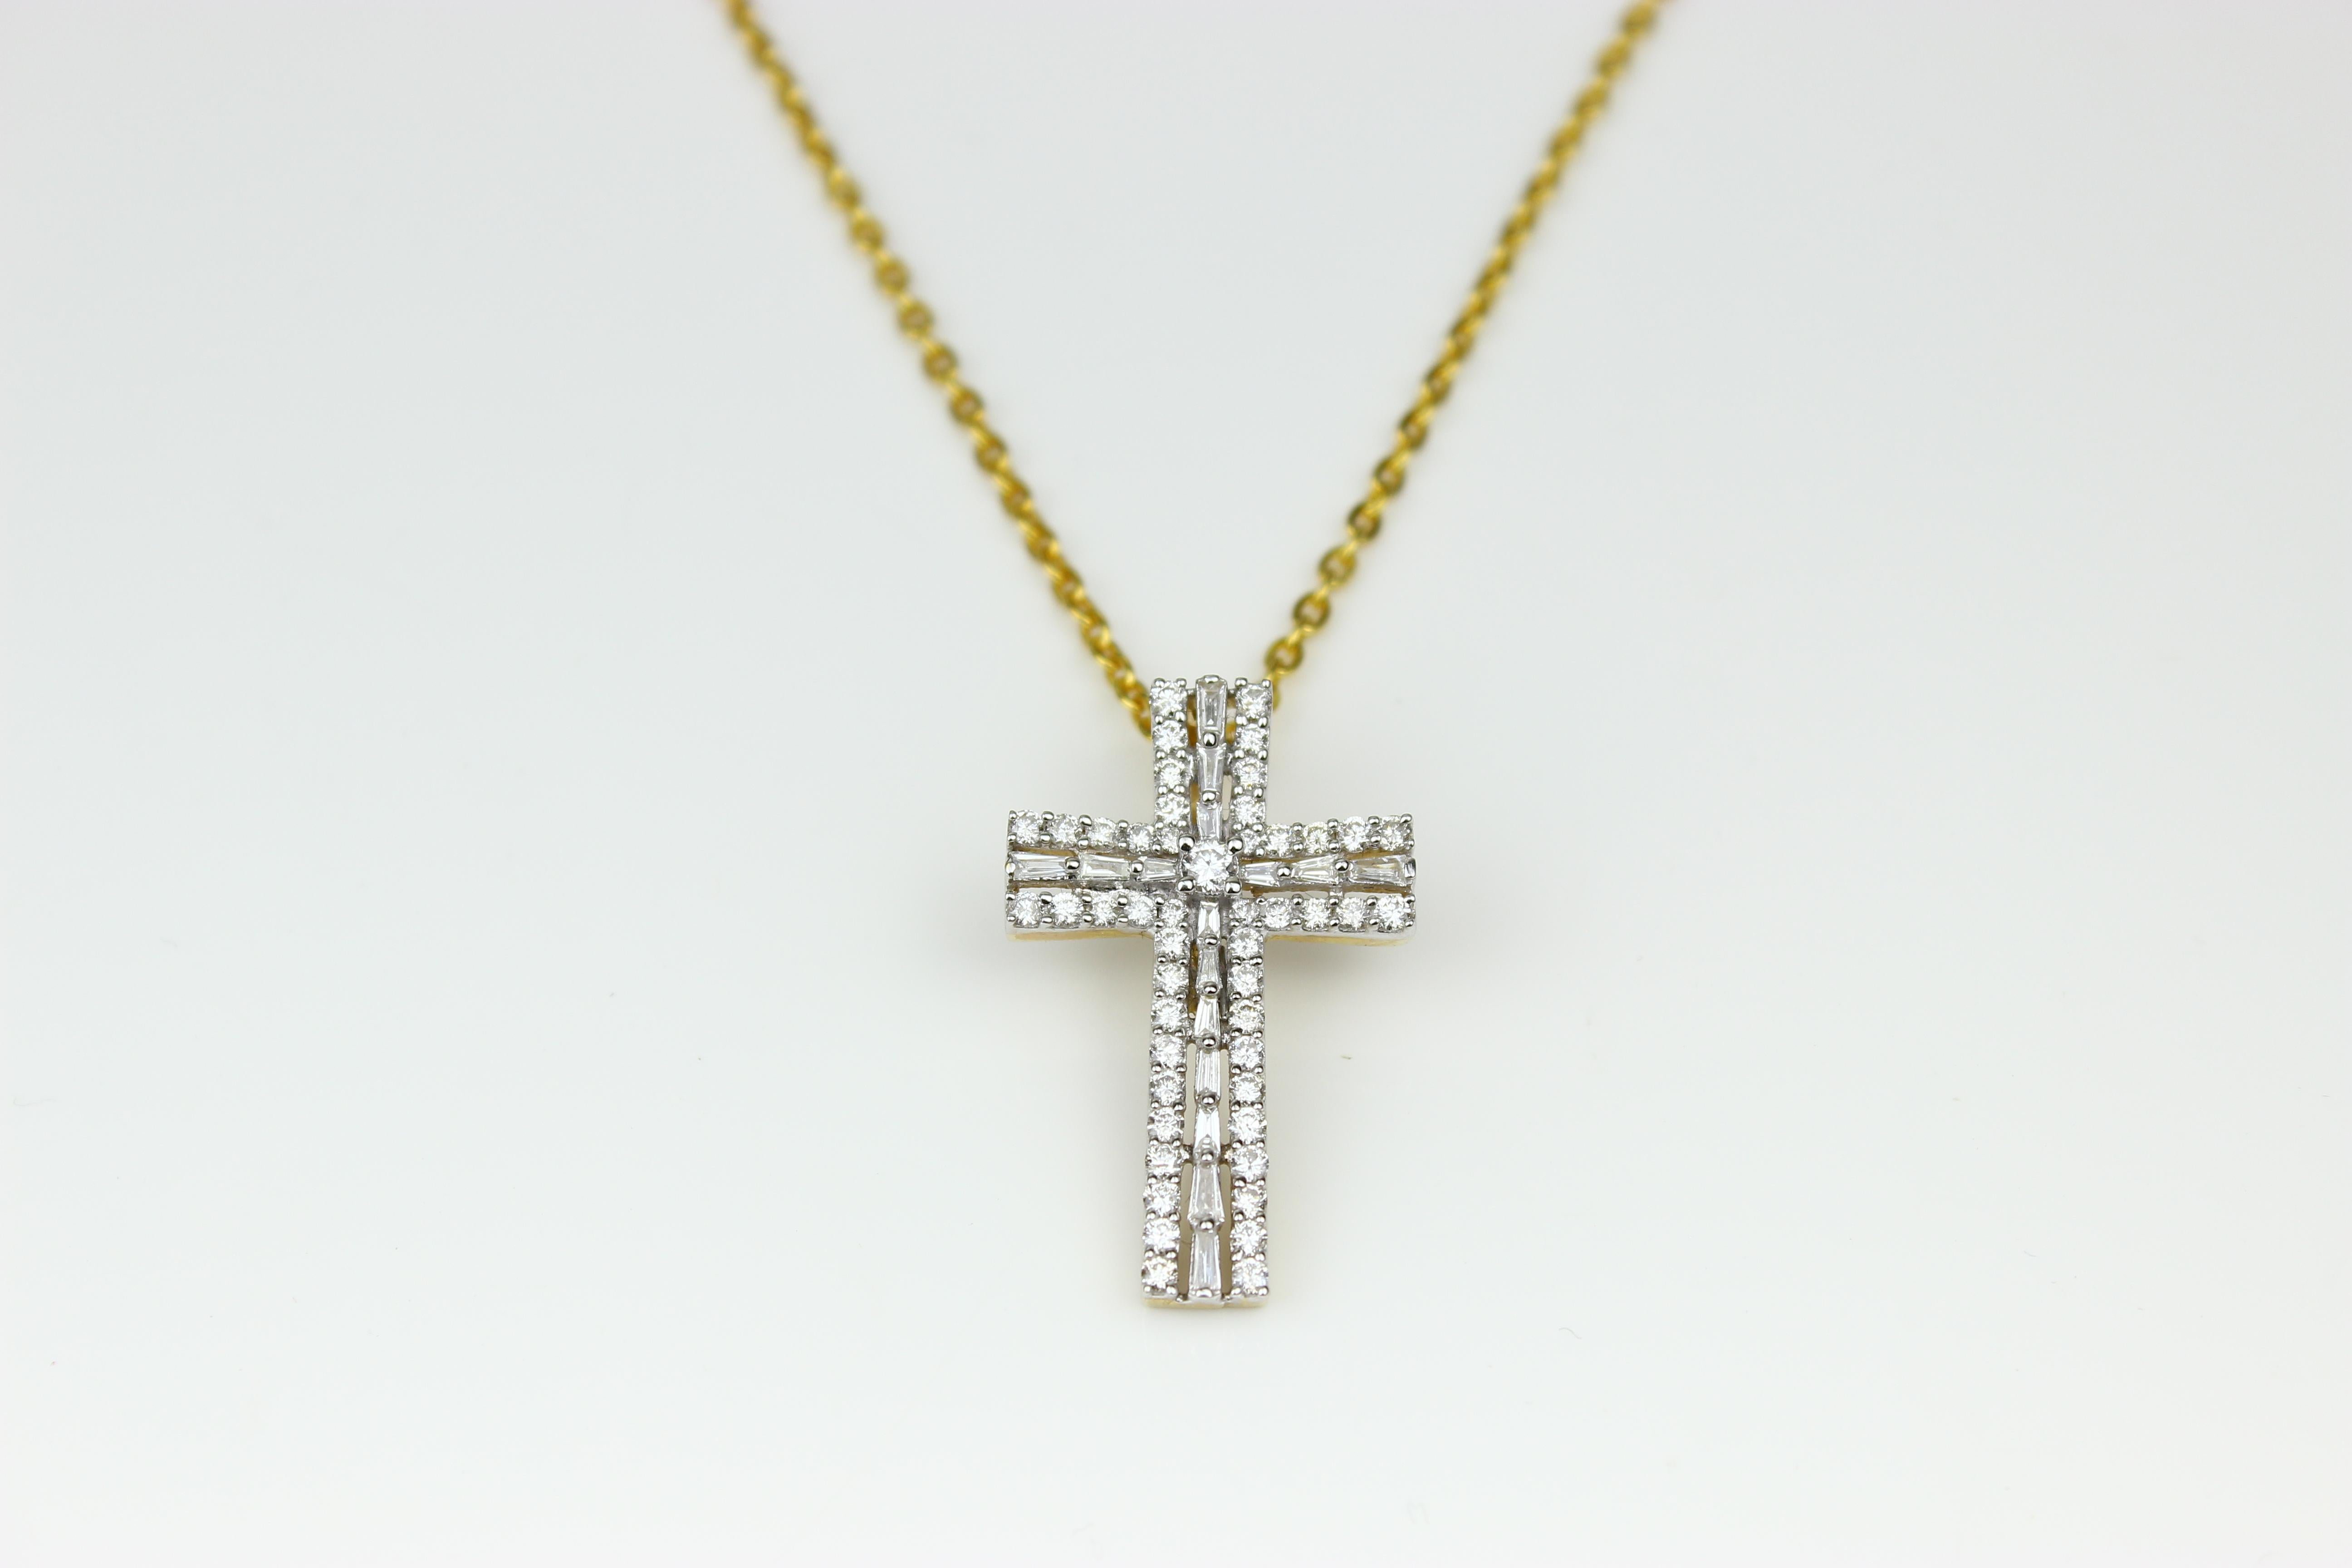 Symbol of FAITH...

Features baguette cut diamonds with dainty round diamonds around them. Made with the highest quality natural diamonds on a 100% guaranteed 18k solid gold. 

THE STONES-
This pendant consists of baguette natural diamonds weighing